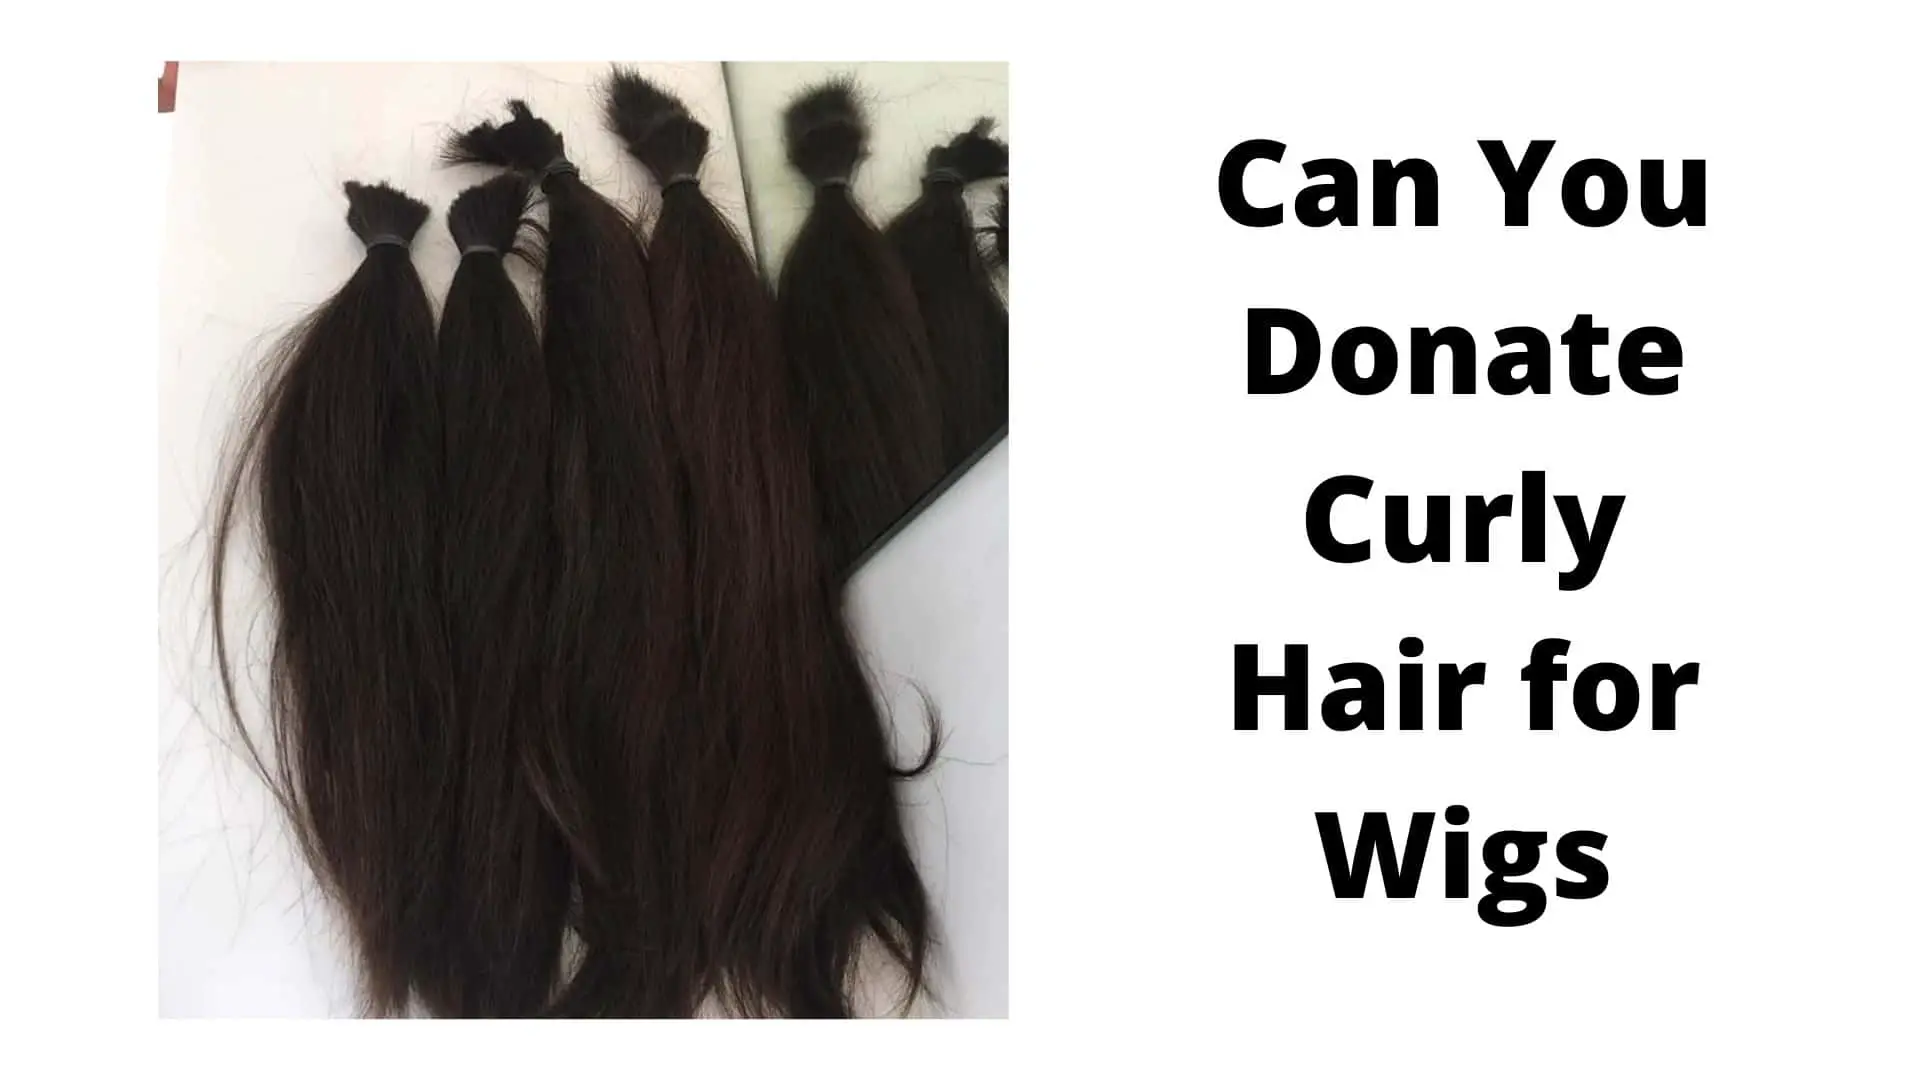 can you donate curly hair for wigs